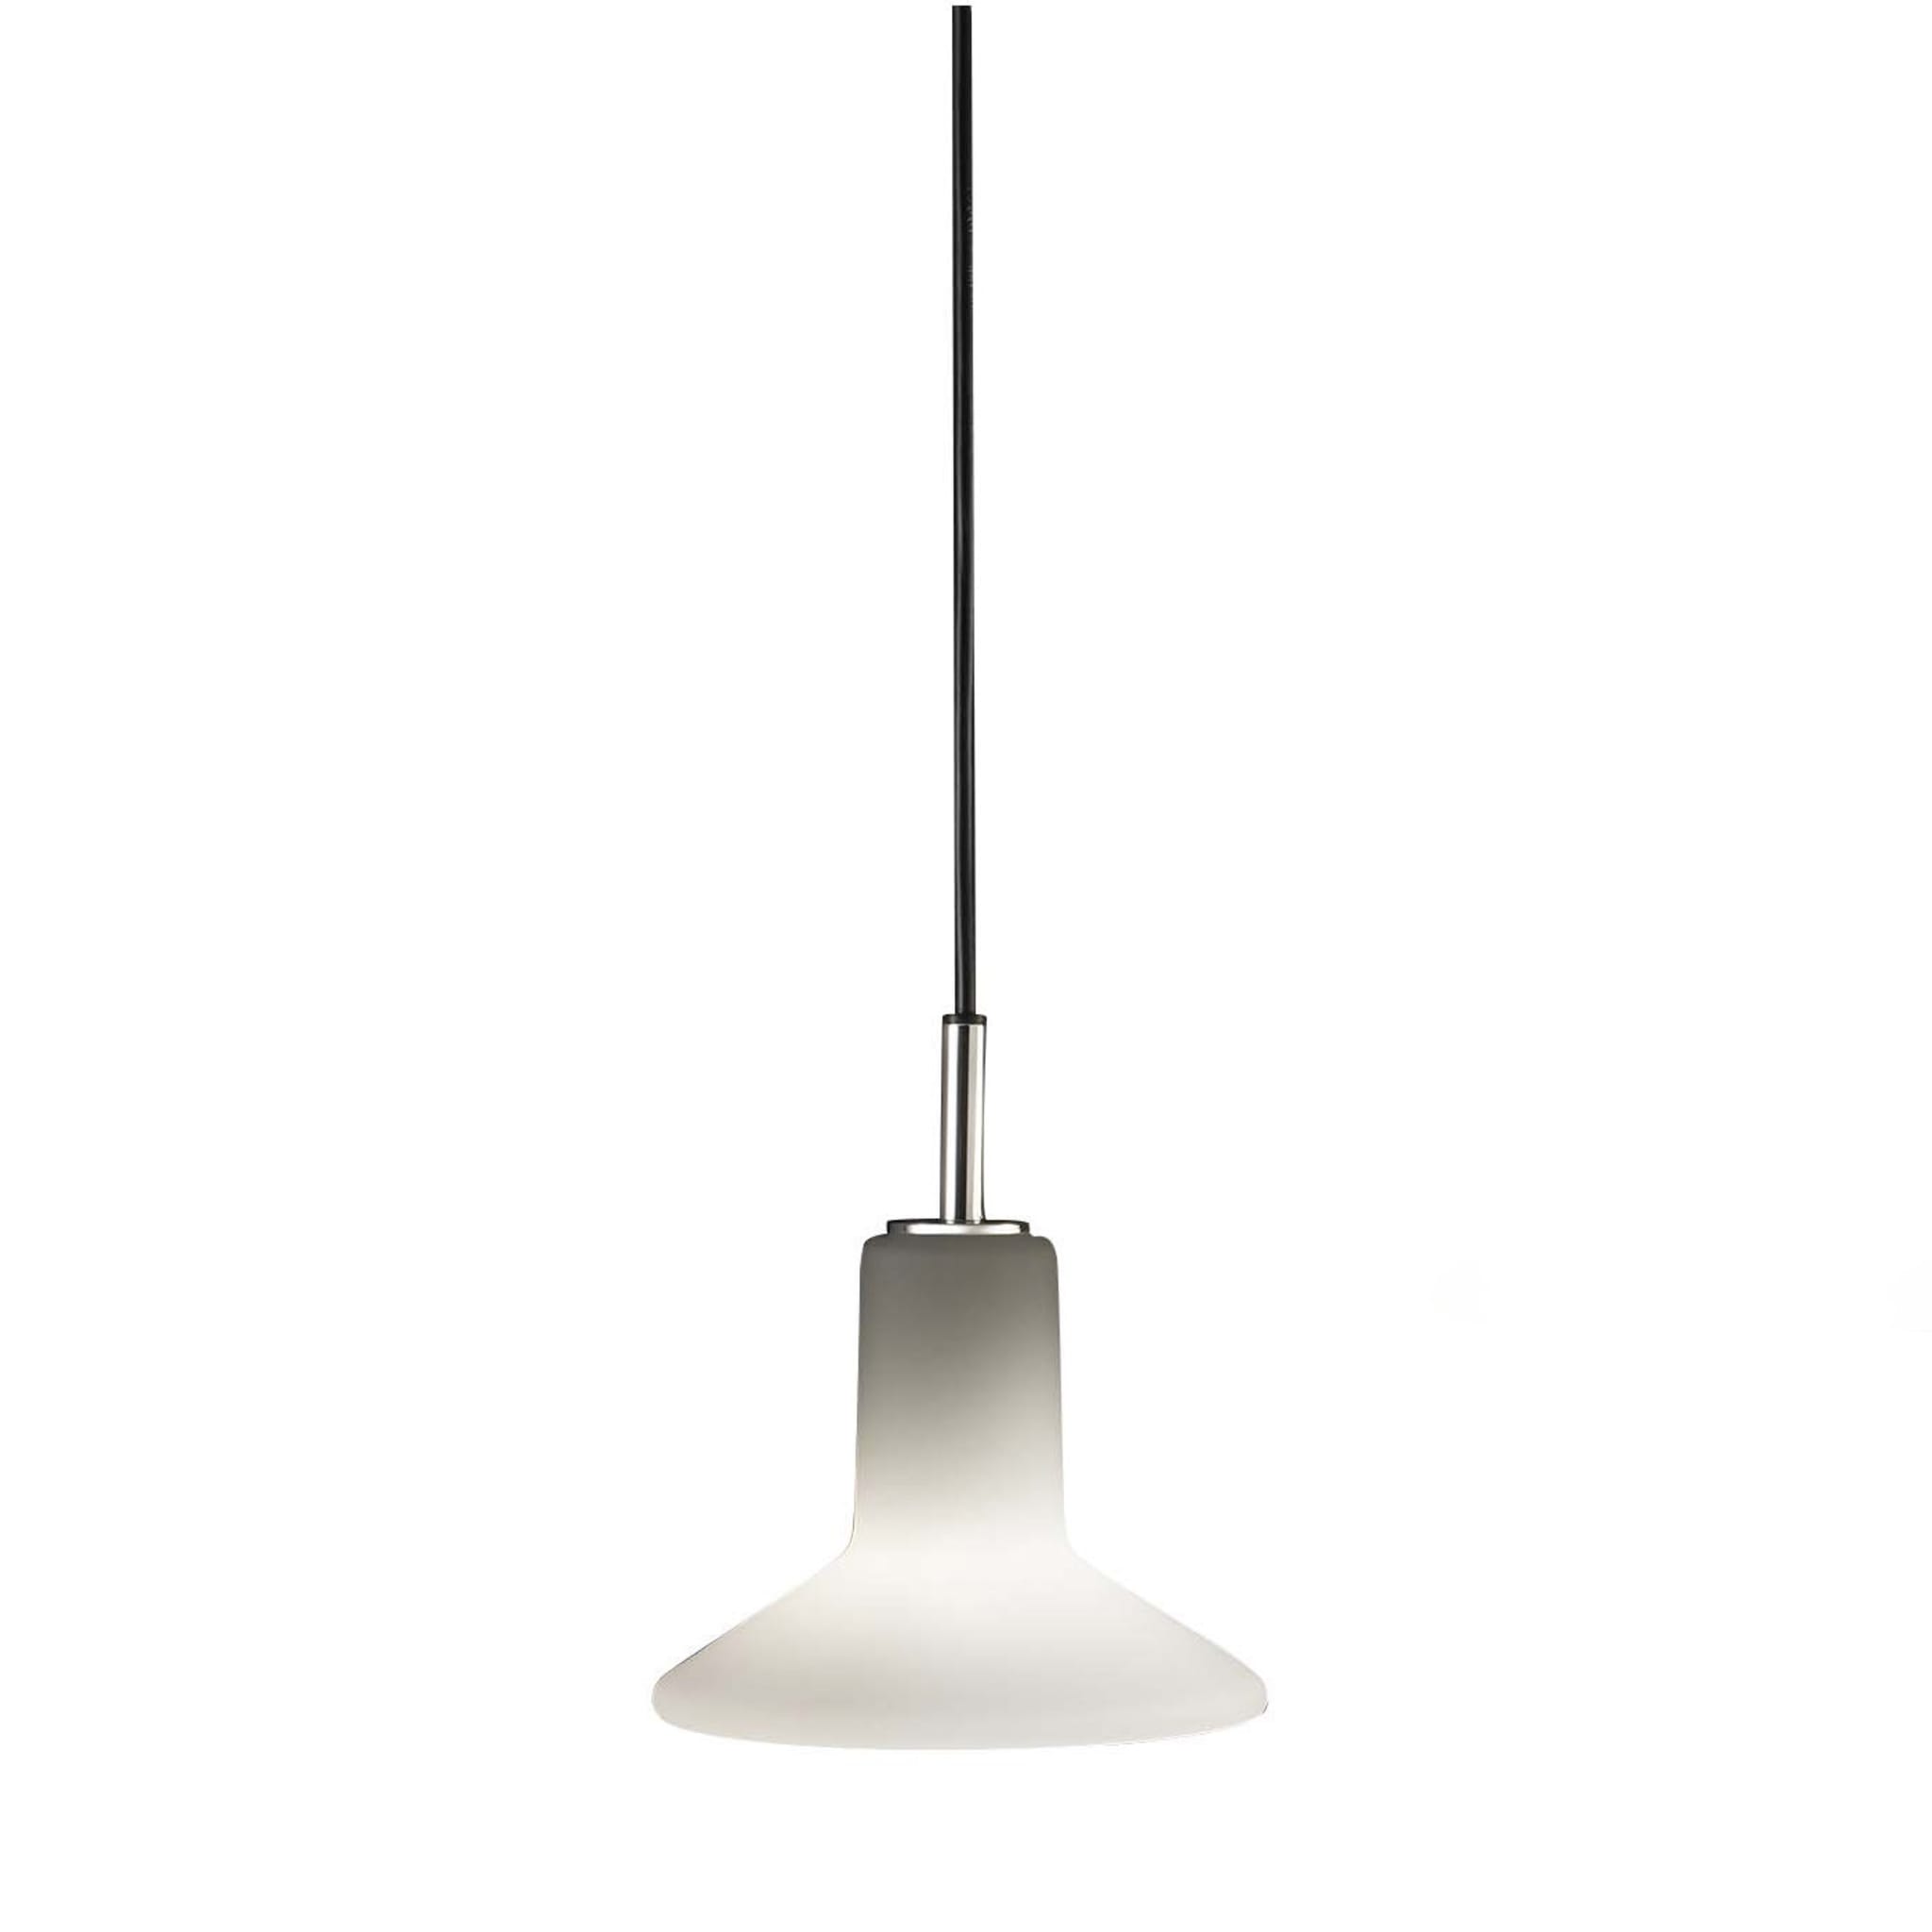 Olly Ceiling Lamp by Lorenza Bozzoli in Chrome - Main view